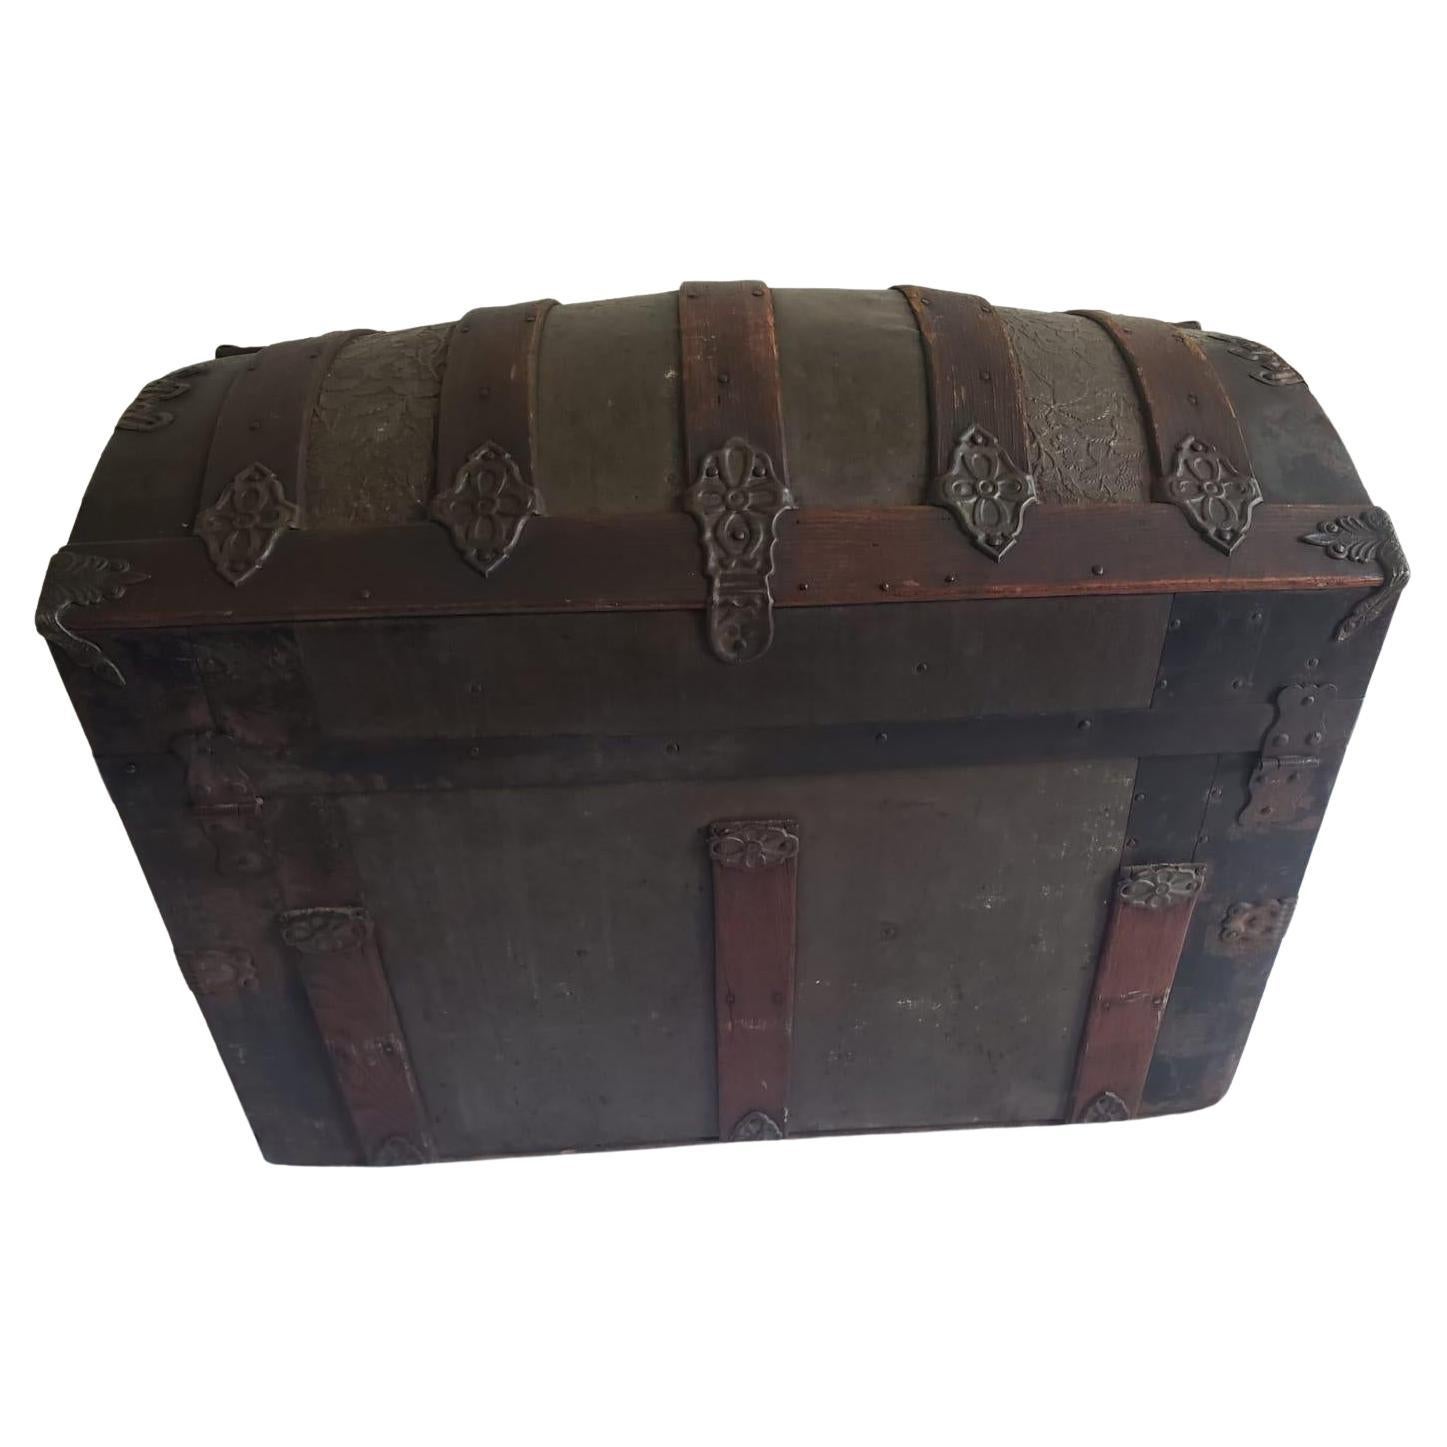 Original 1900s dome top steamer trunk in excellent vintage Condition. The is a lock but the key is not present. It has original leather and iron handle on each side. It also has iron fittings, wood slats. Zinc finish as well. It measures 
Measures: